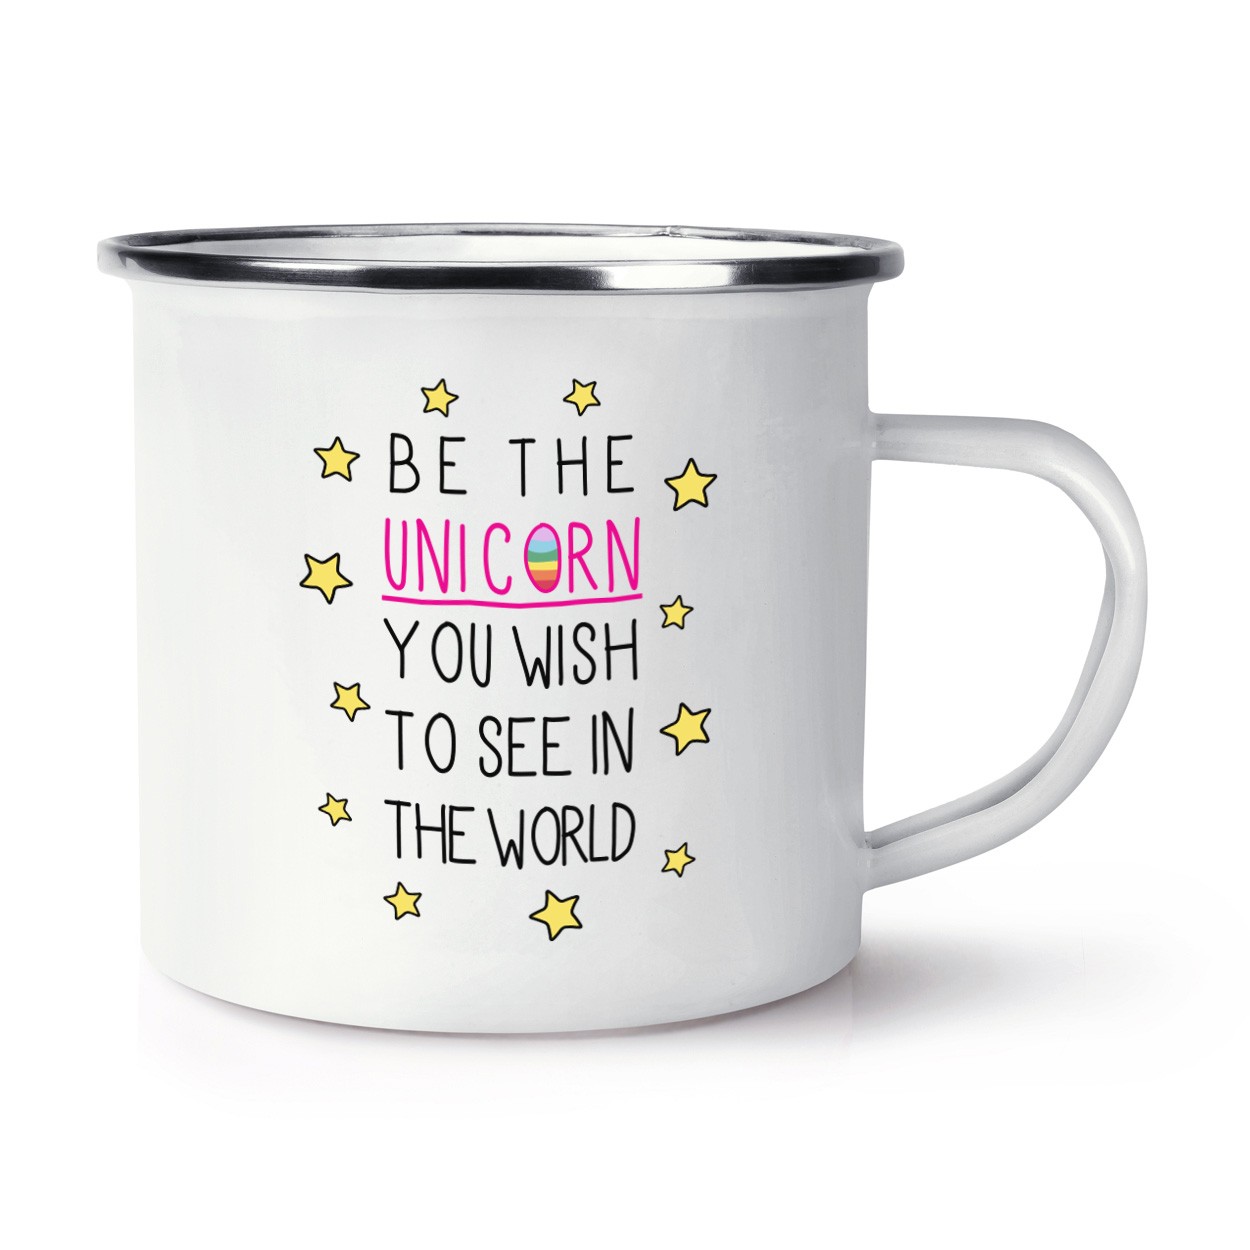 Be The Unicorn You Wish to See in the World Retro Enamel Mug Cup